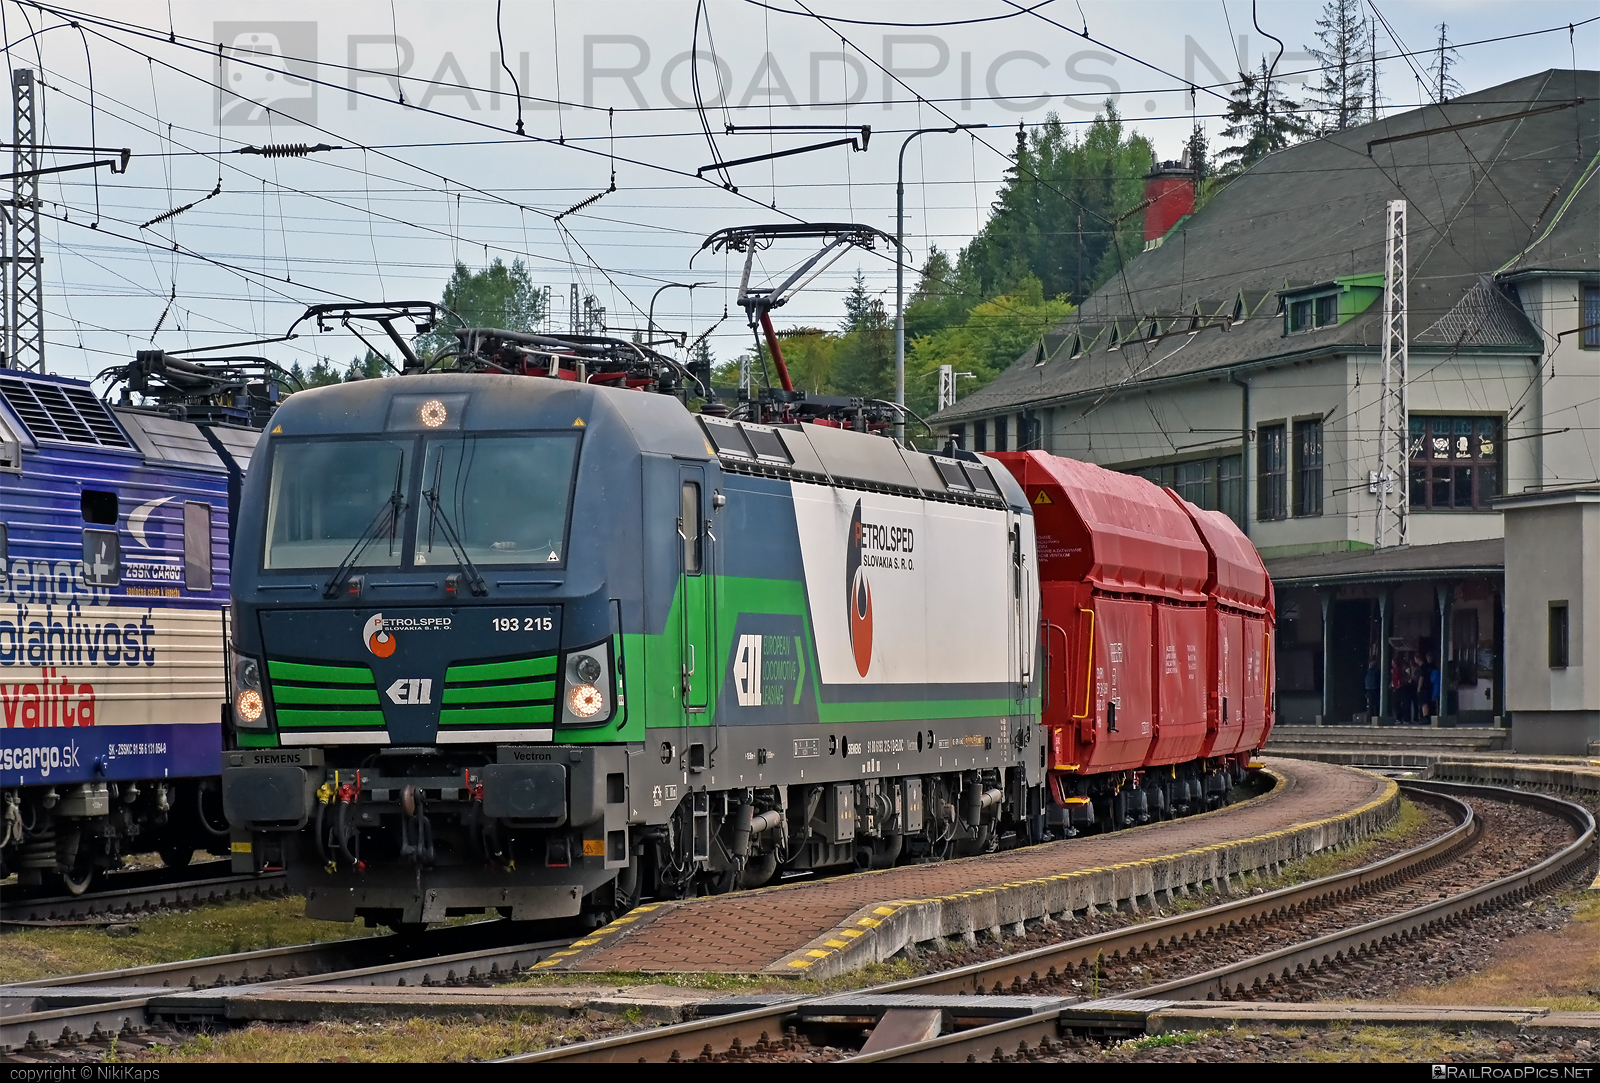 Siemens Vectron MS - 193 215 operated by PETROLSPED Slovakia s.r.o. #ell #ellgermany #eloc #europeanlocomotiveleasing #hopperwagon #petrolsped #petrolspedSlovakia #petrolspedSlovakiaSro #railLog #railLogSro #siemens #siemensVectron #siemensVectronMS #vectron #vectronMS